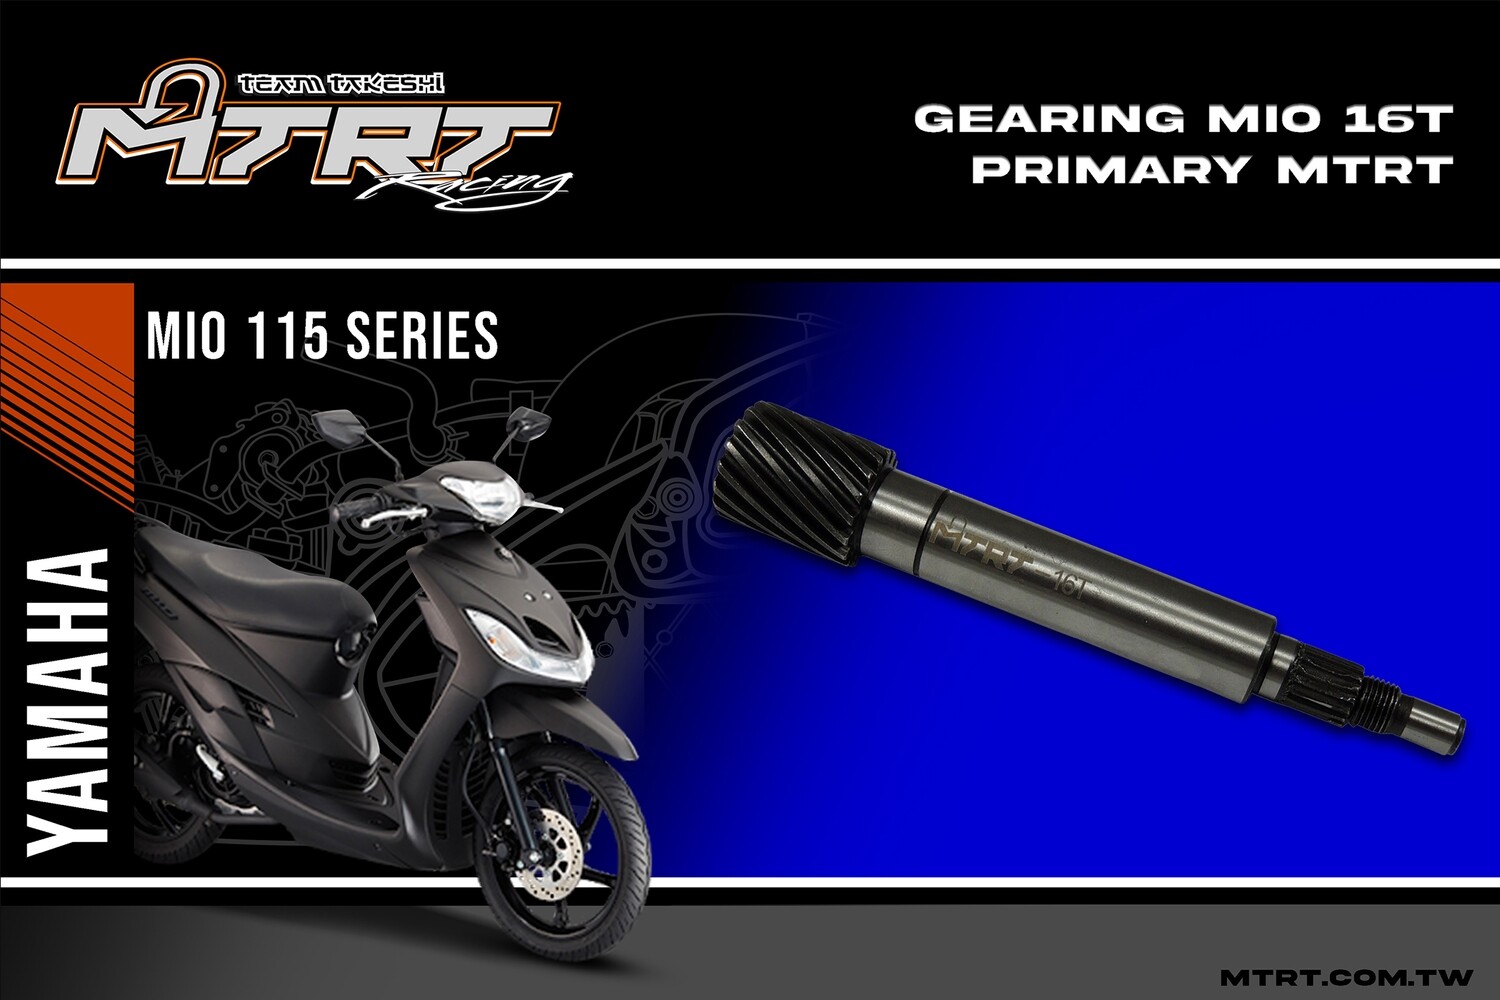 GEARING  MIO  16T  Primary MTRT